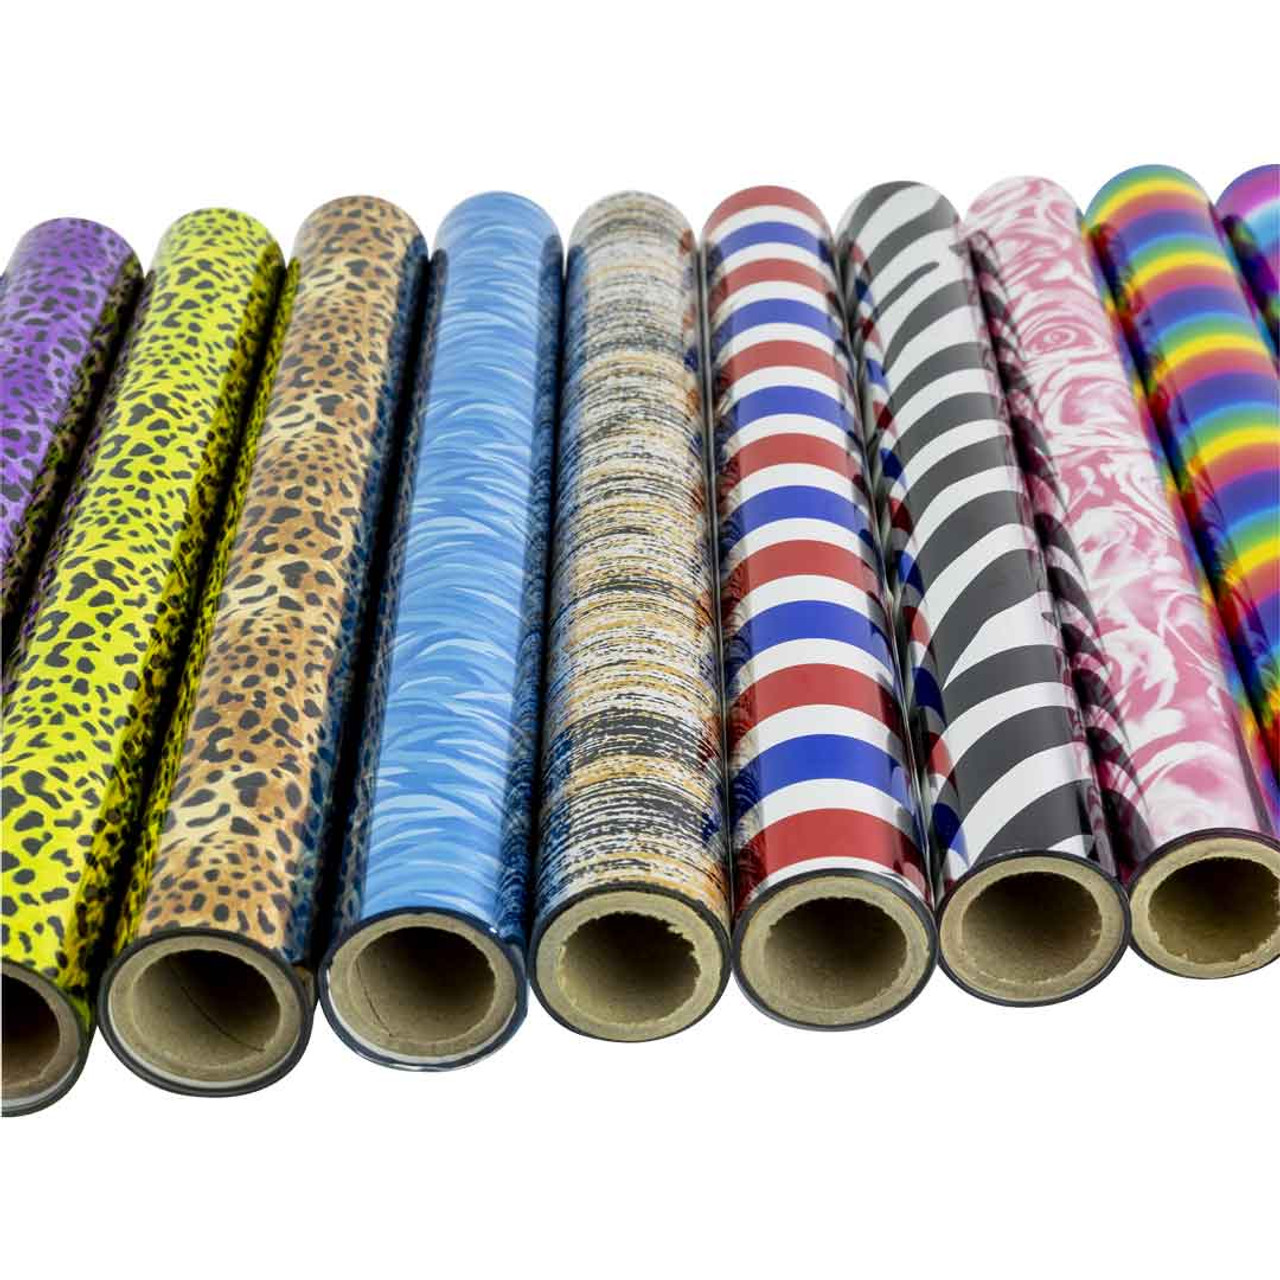 218 Adhesive Roller Covers